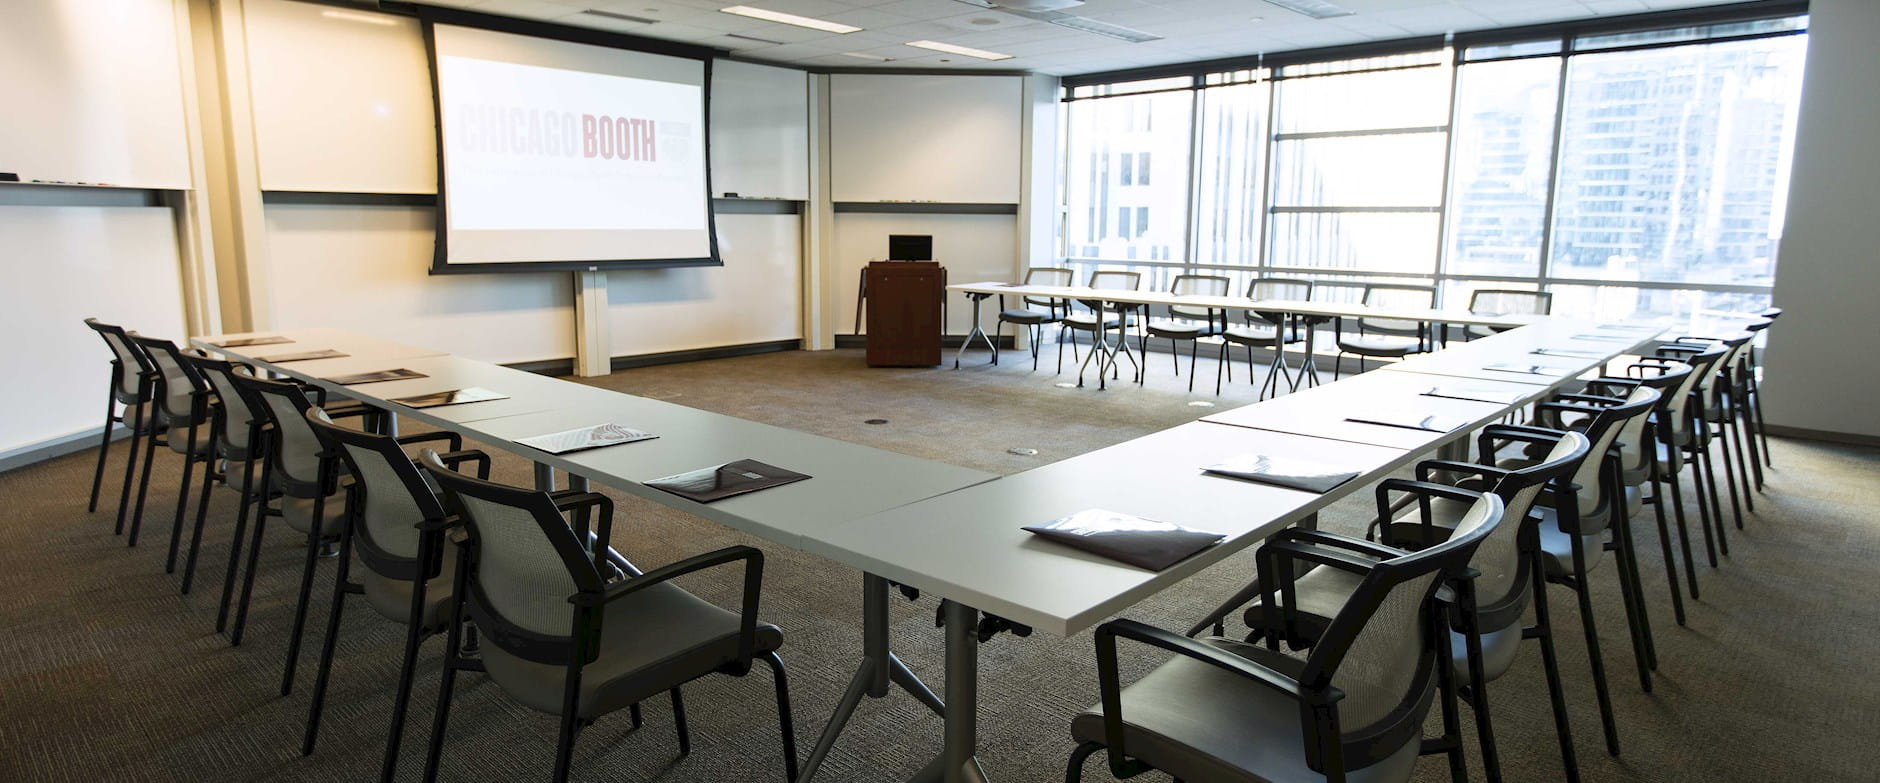 Room 422 in Gleacher Center showing the full semi-circle of desks and chairs with a projector screen